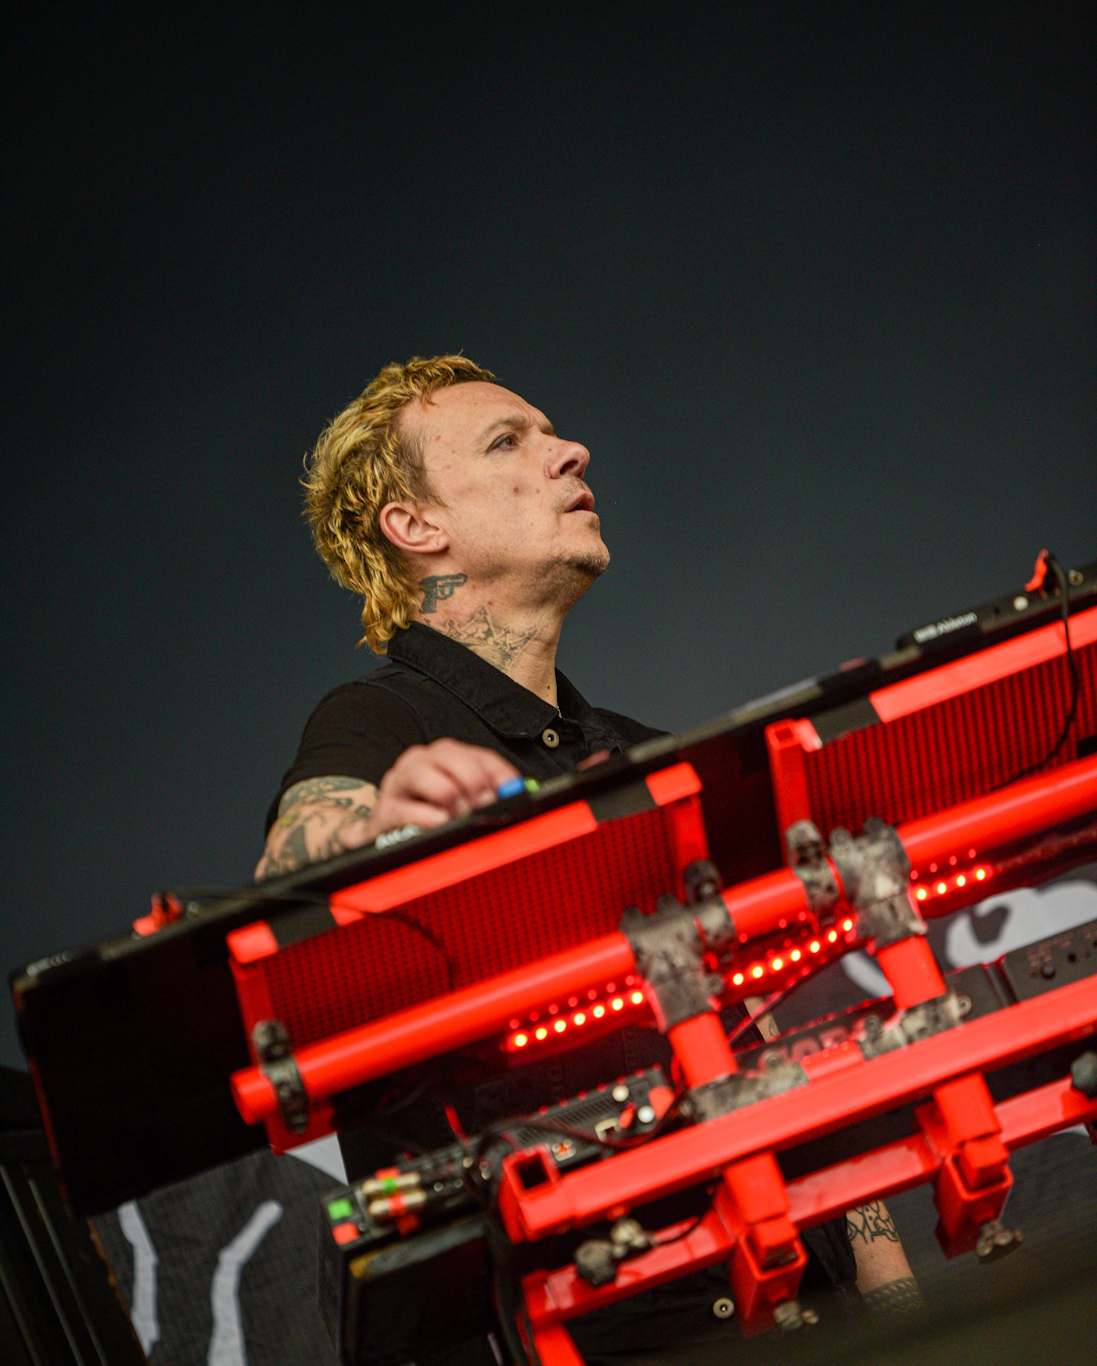 IN FOCUS// The Prodigy at Belsonic, Ormeau Park © Bernie McAllister